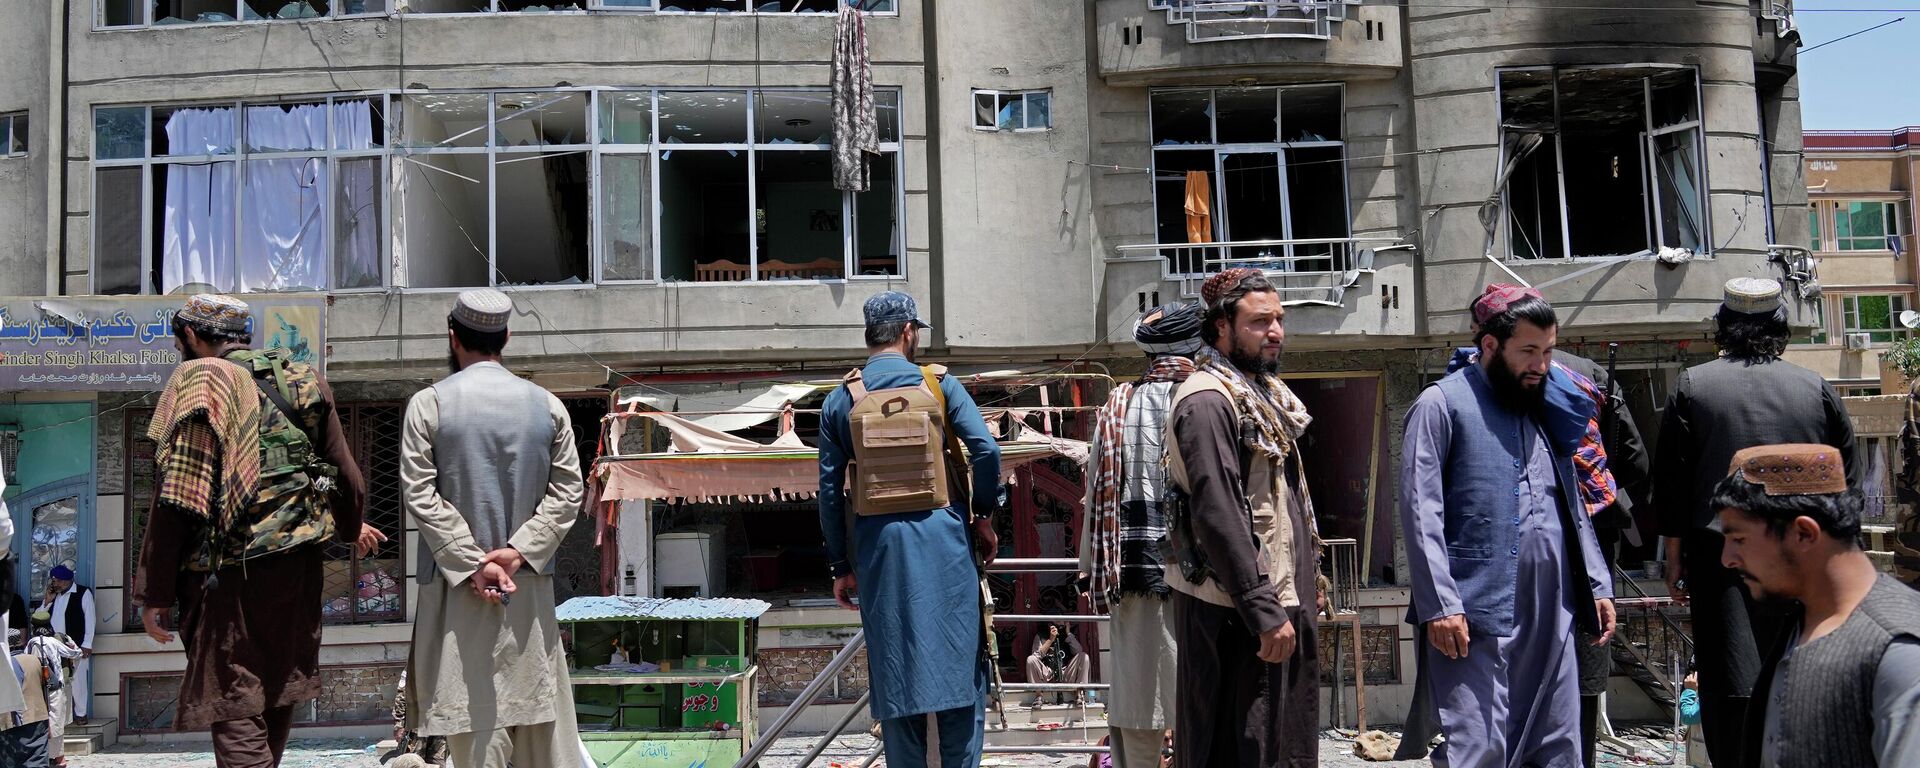 Taliban fighters stand guard at the site of an explosion in front of a Sikh temple in Kabul, Afghanistan, Saturday, June 18, 2022. Several explosions and gunfire ripped through the temple in Afghanistan's capital. (AP Photo/Ebrahim Noroozi) - Sputnik International, 1920, 14.08.2022